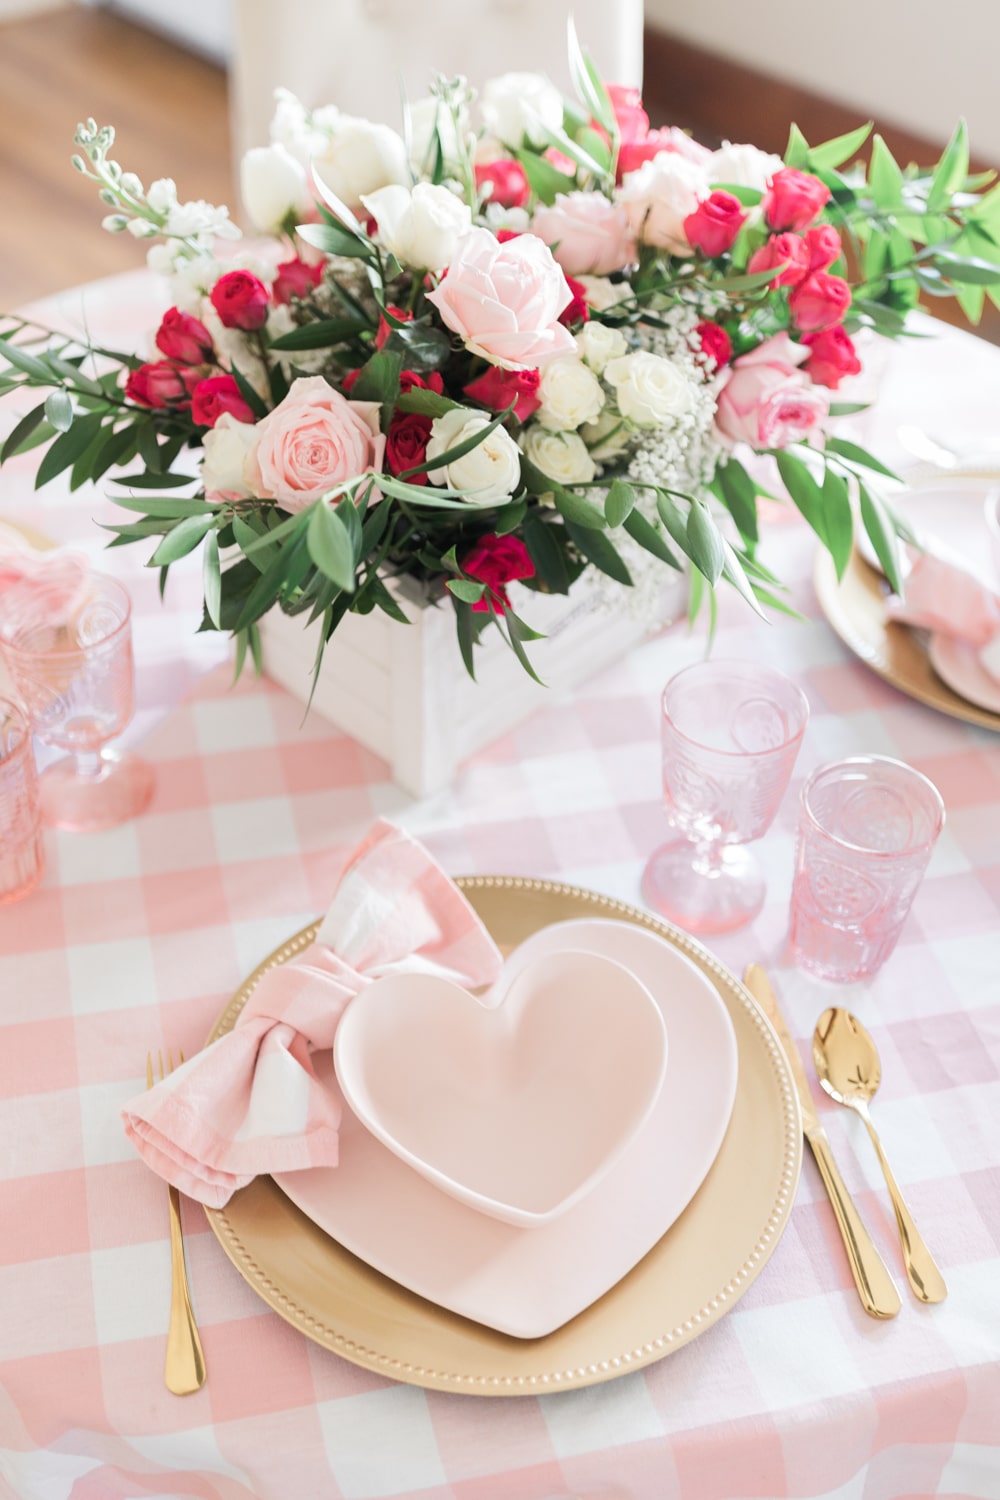 Pink valentine's day table decor by blogger Stephanie Ziajka on Diary of a Debutante